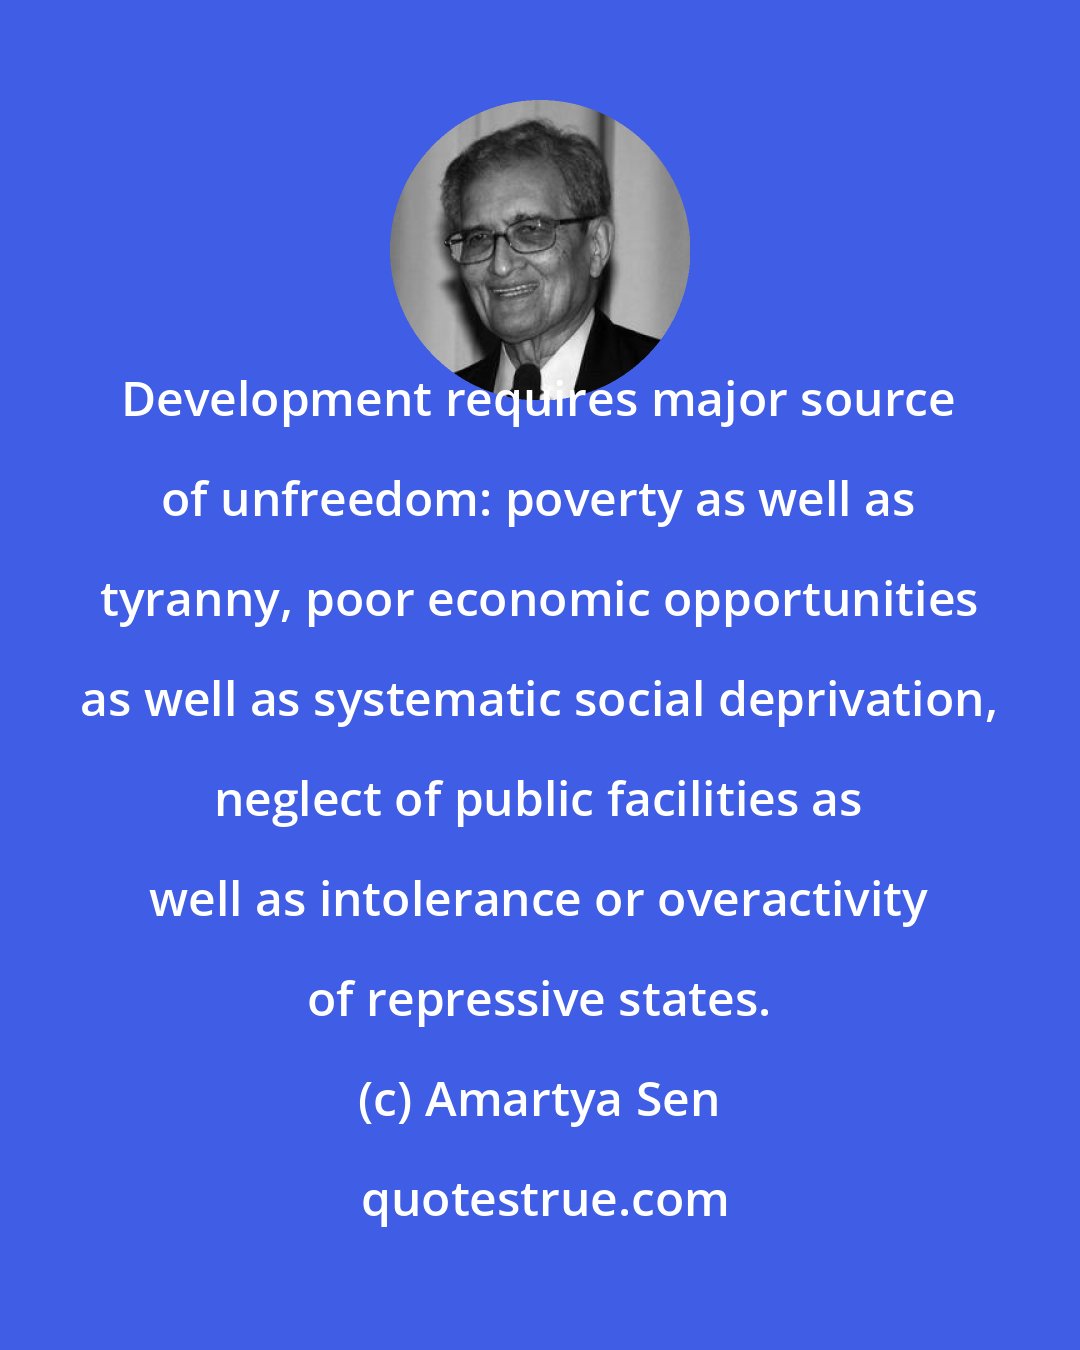 Amartya Sen: Development requires major source of unfreedom: poverty as well as tyranny, poor economic opportunities as well as systematic social deprivation, neglect of public facilities as well as intolerance or overactivity of repressive states.